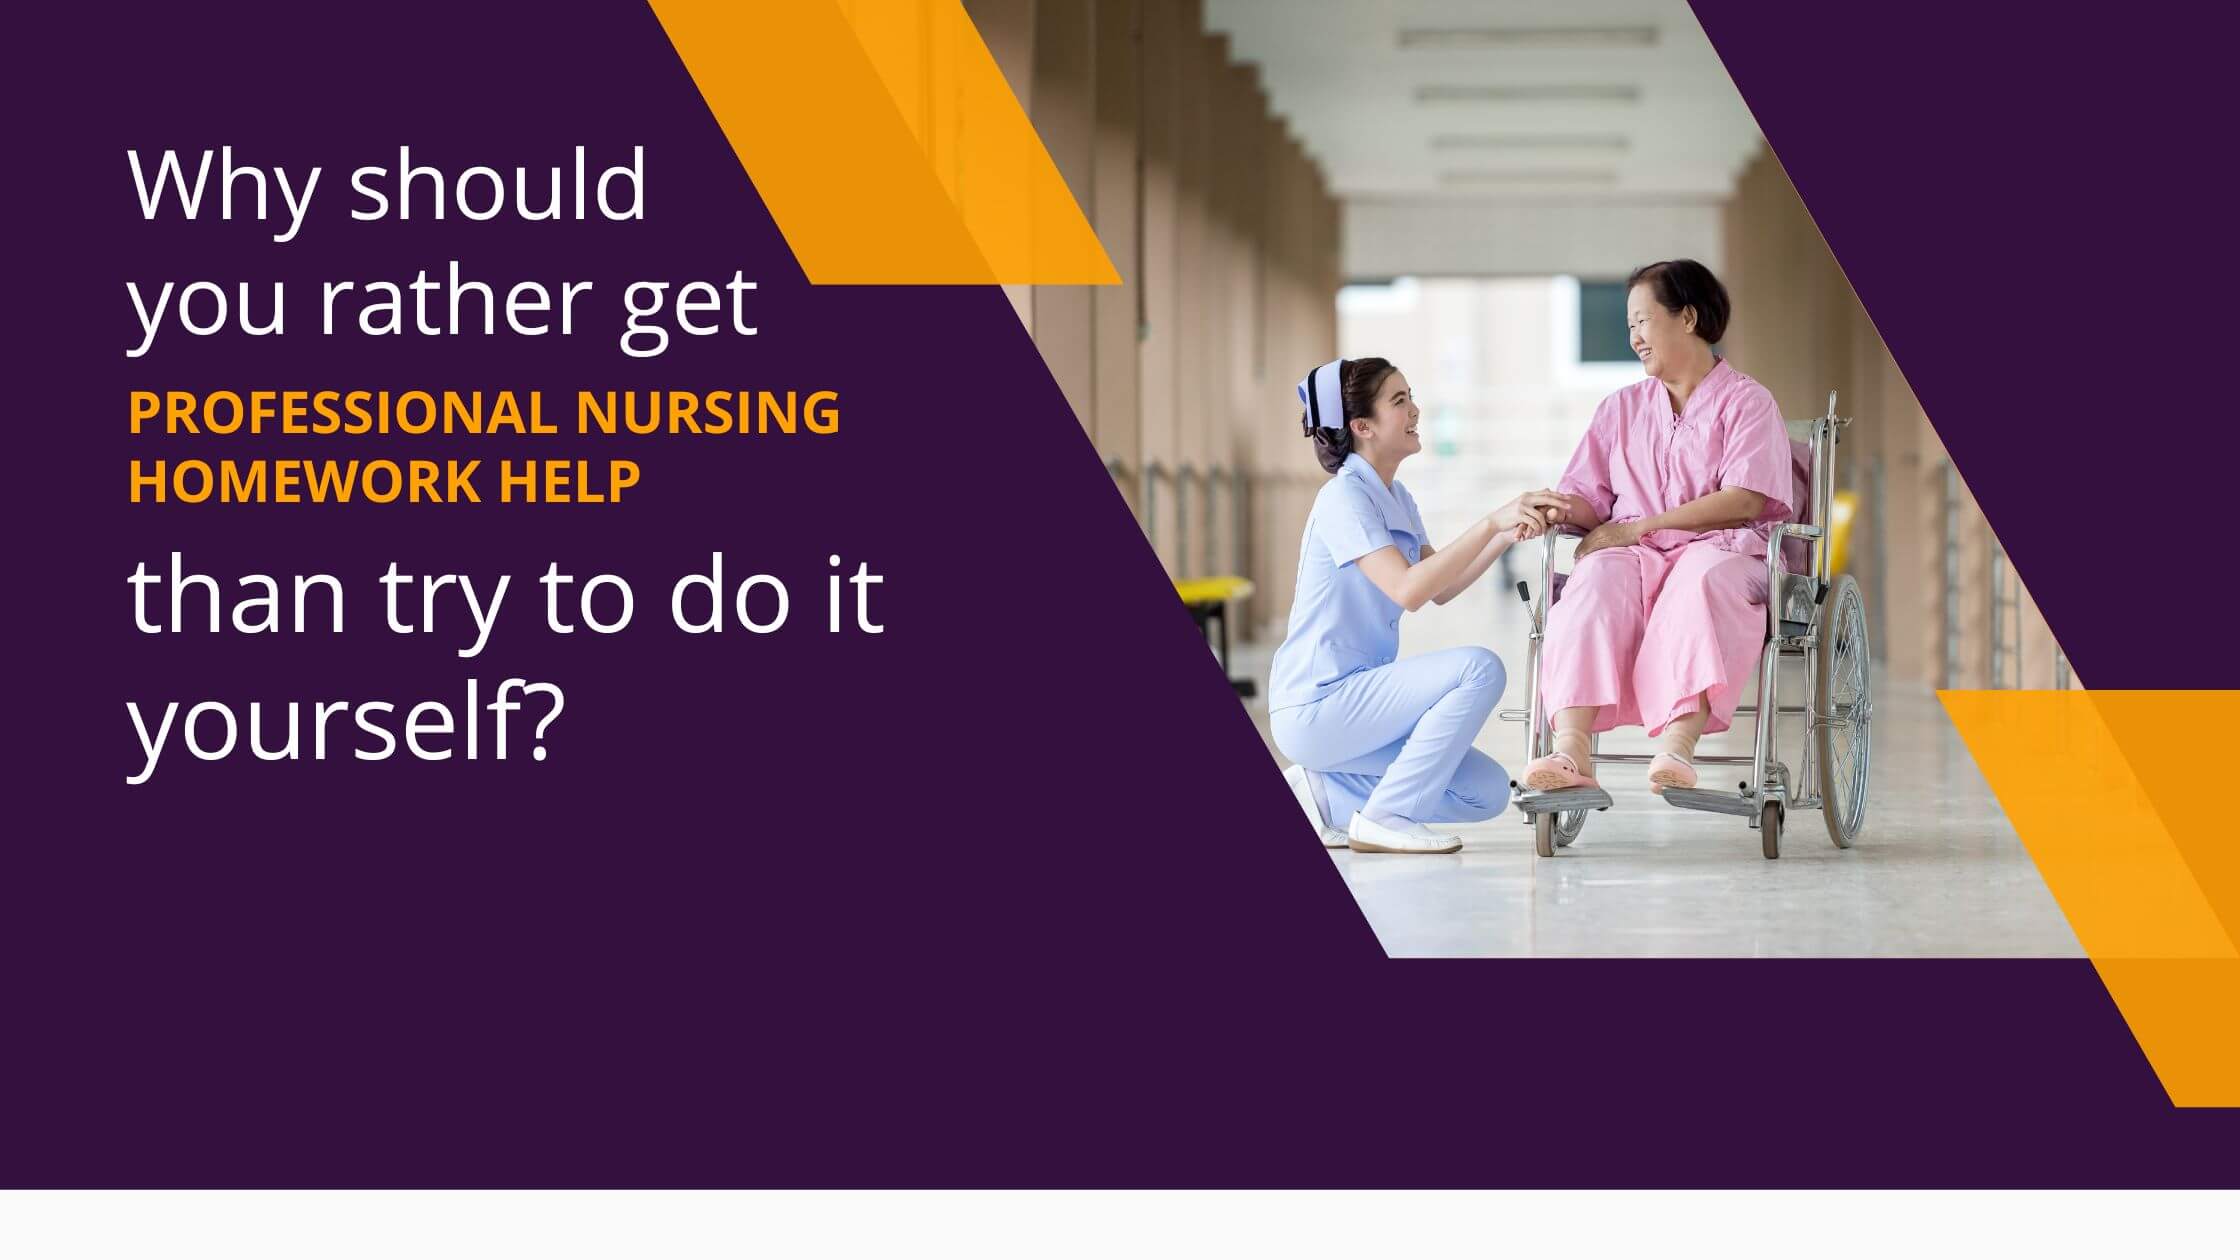 Why should you rather get professional nursing homework help than try to do it yourself